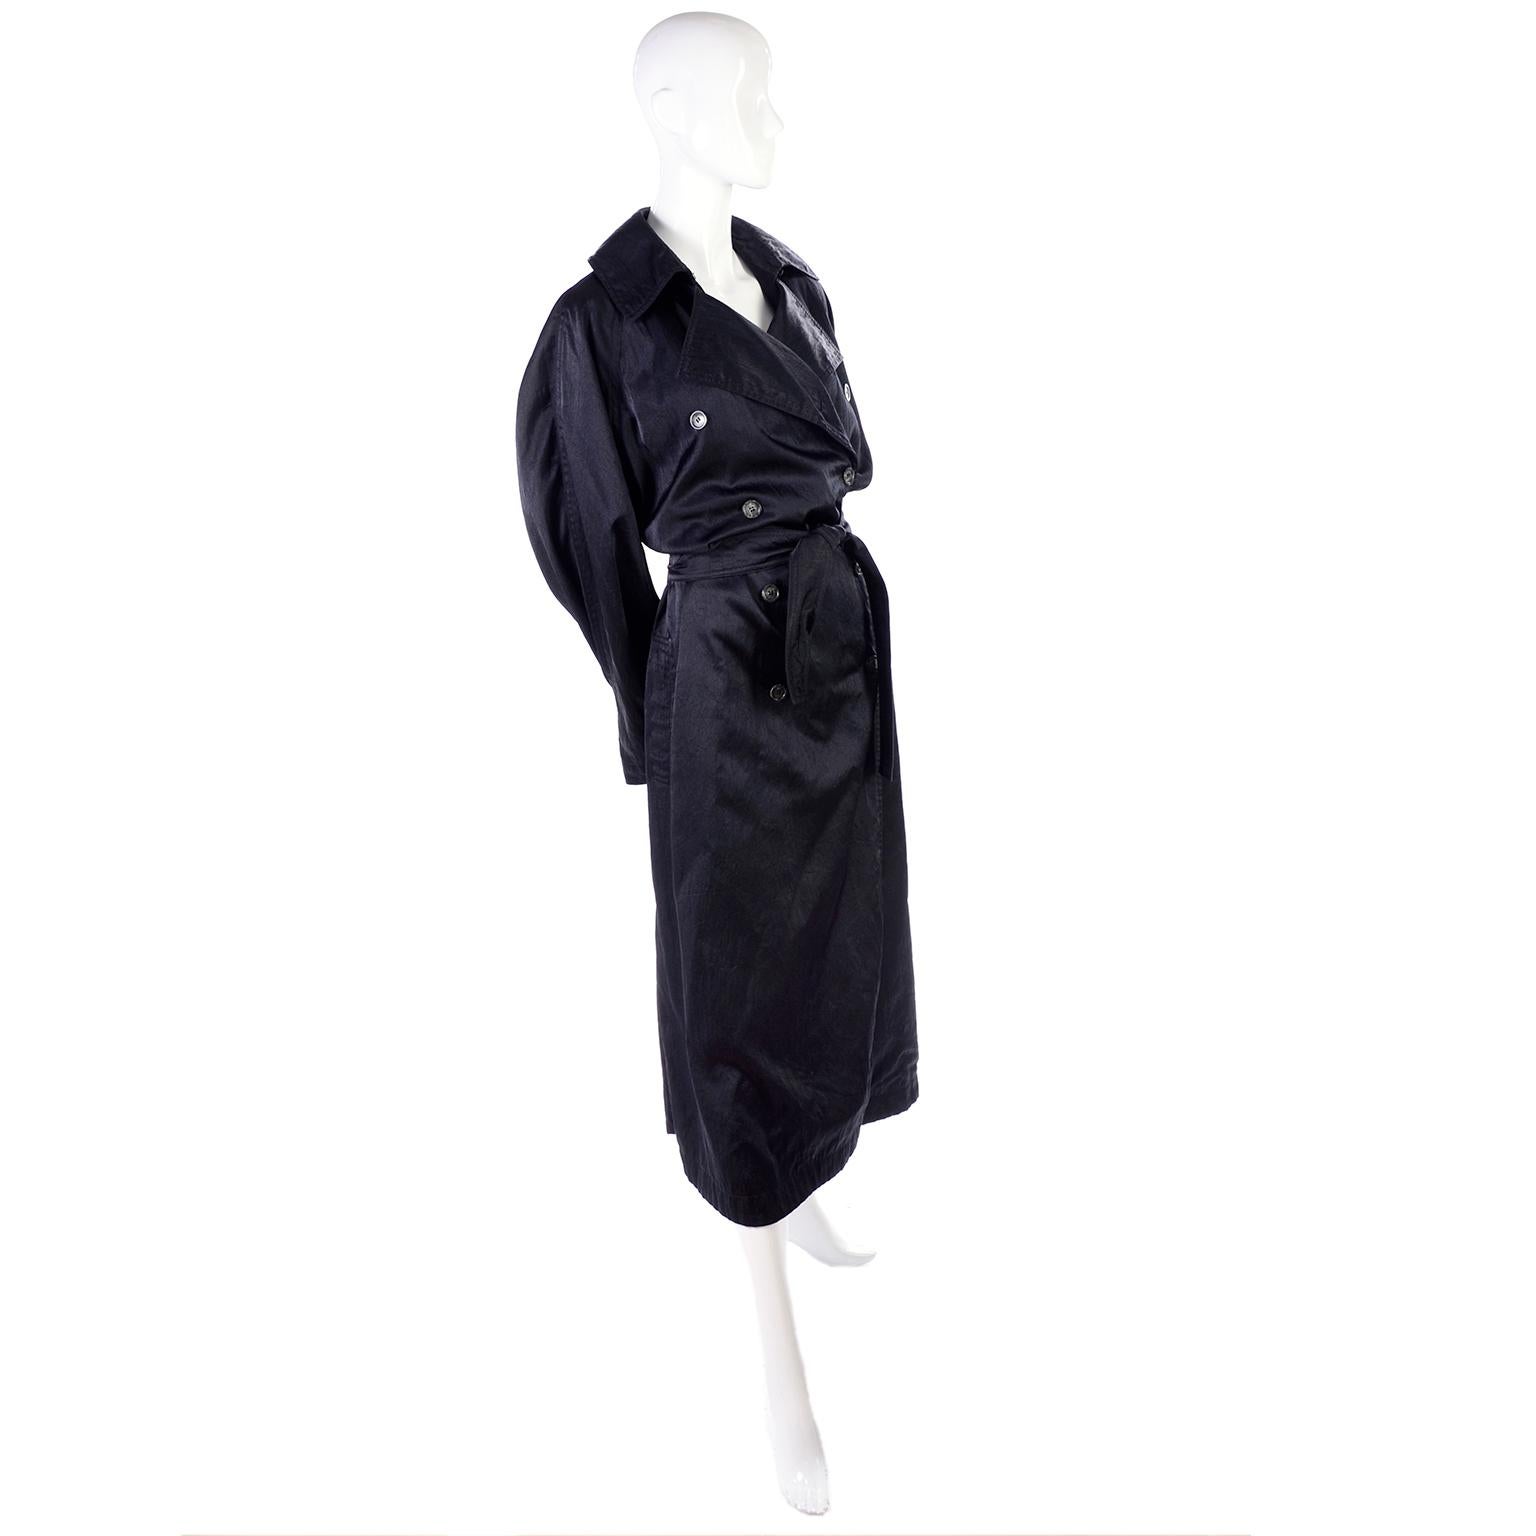 This is a great vintage Alaia long trench coat style raincoat with waist belt. This double breasted designer rain jacket has side slit pockets and can be worn buttoned all the way up, or with the lapels out. It has a pleated slit running up the back